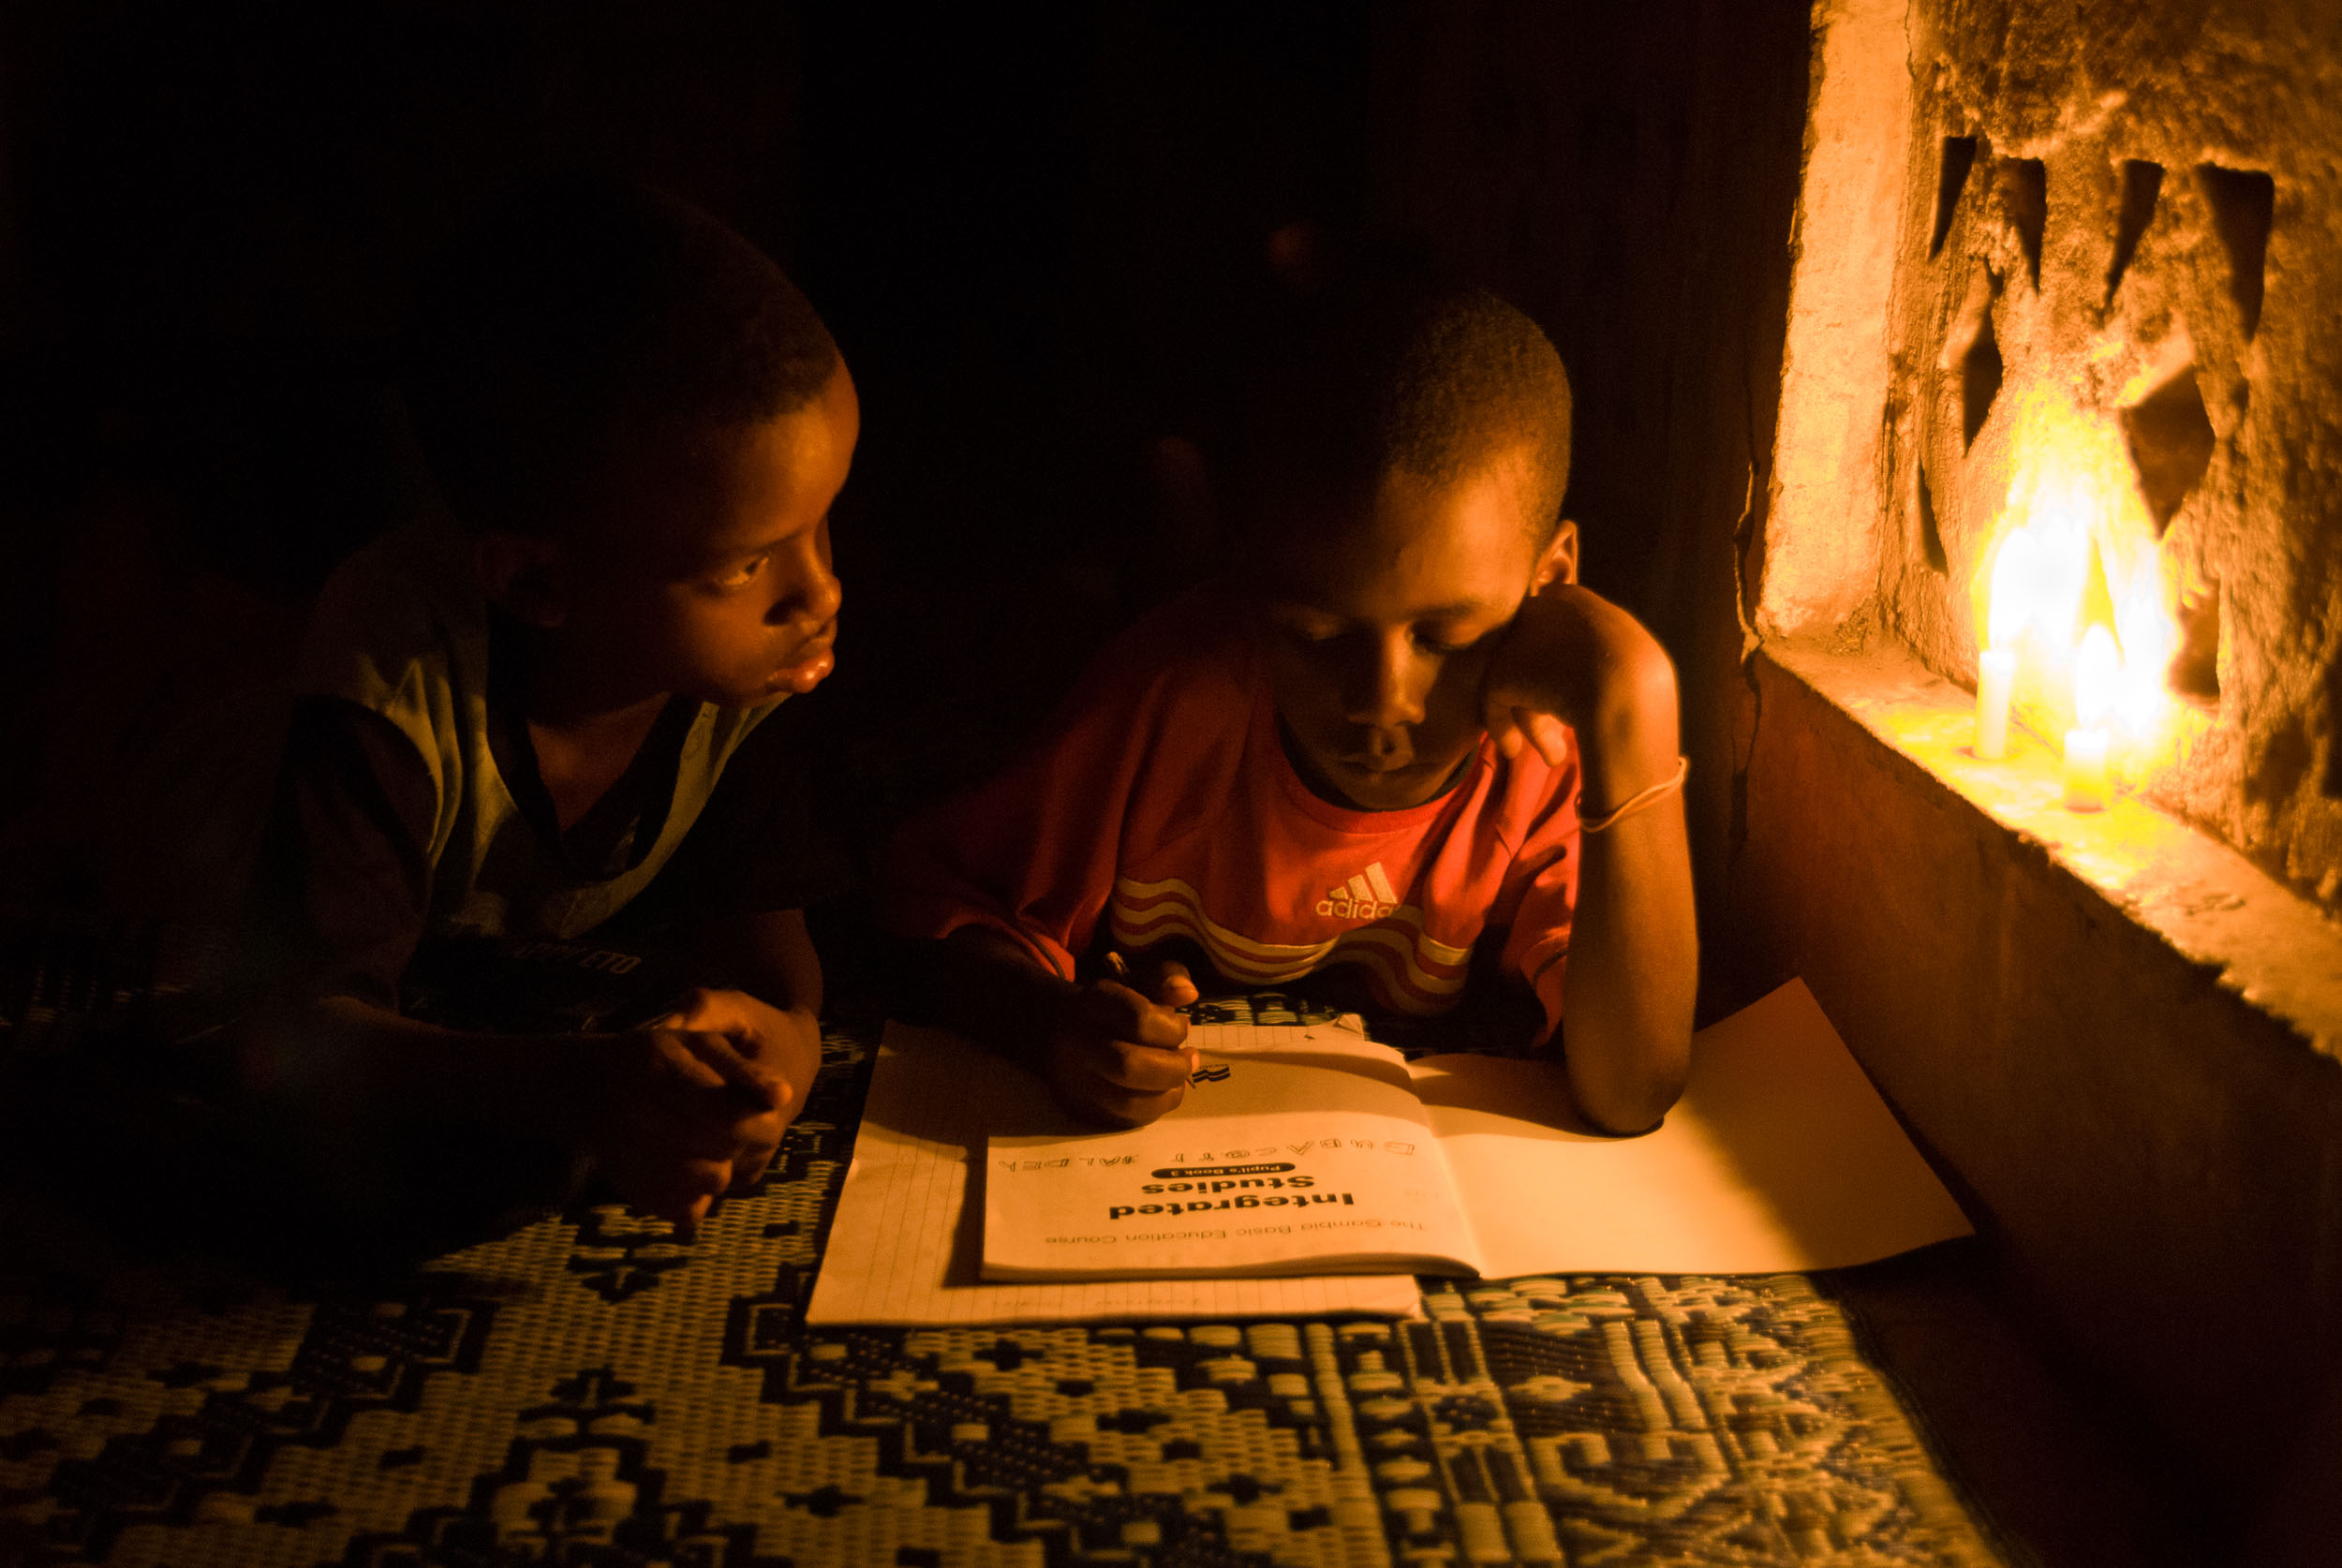  Kids Doing Homework with Candle Light, Gambia, Africa 